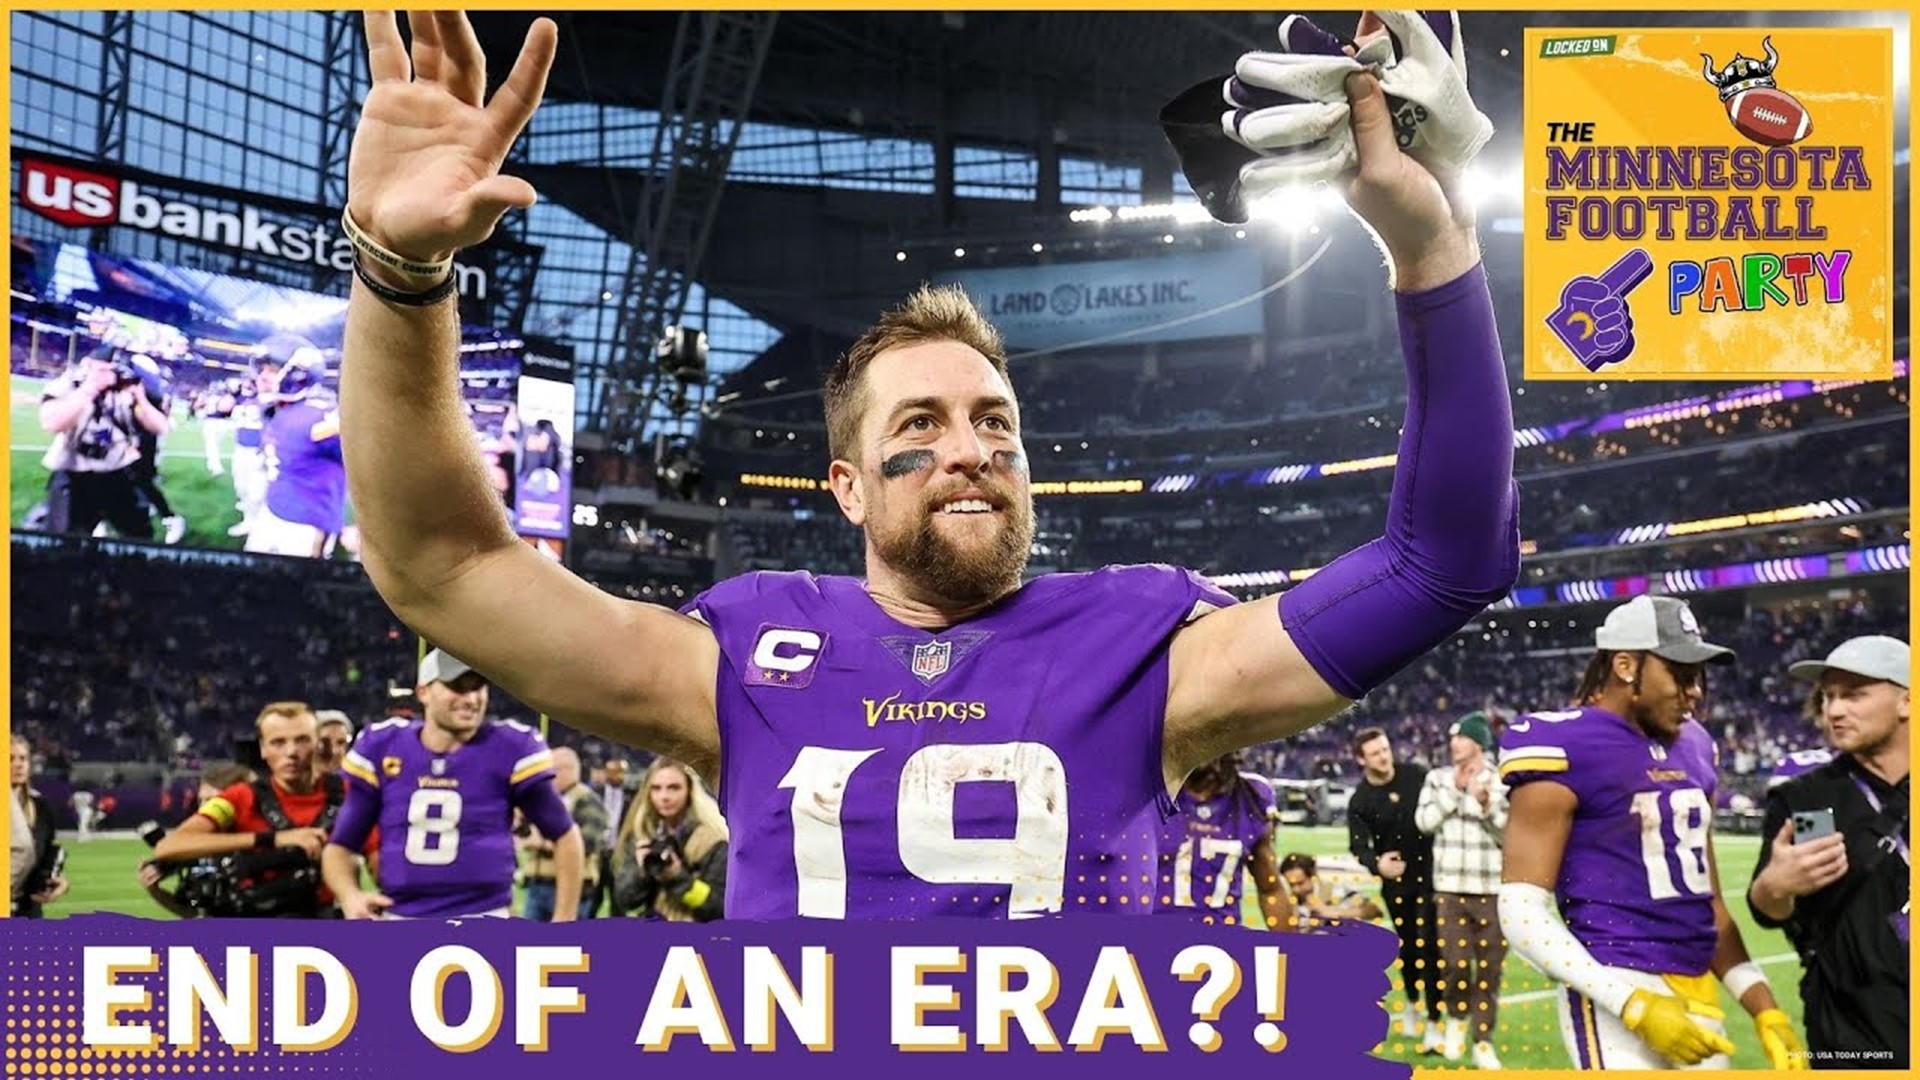 INSTANT REACTION to the Adam Thielen Breaking News - The Minnesota Football Party